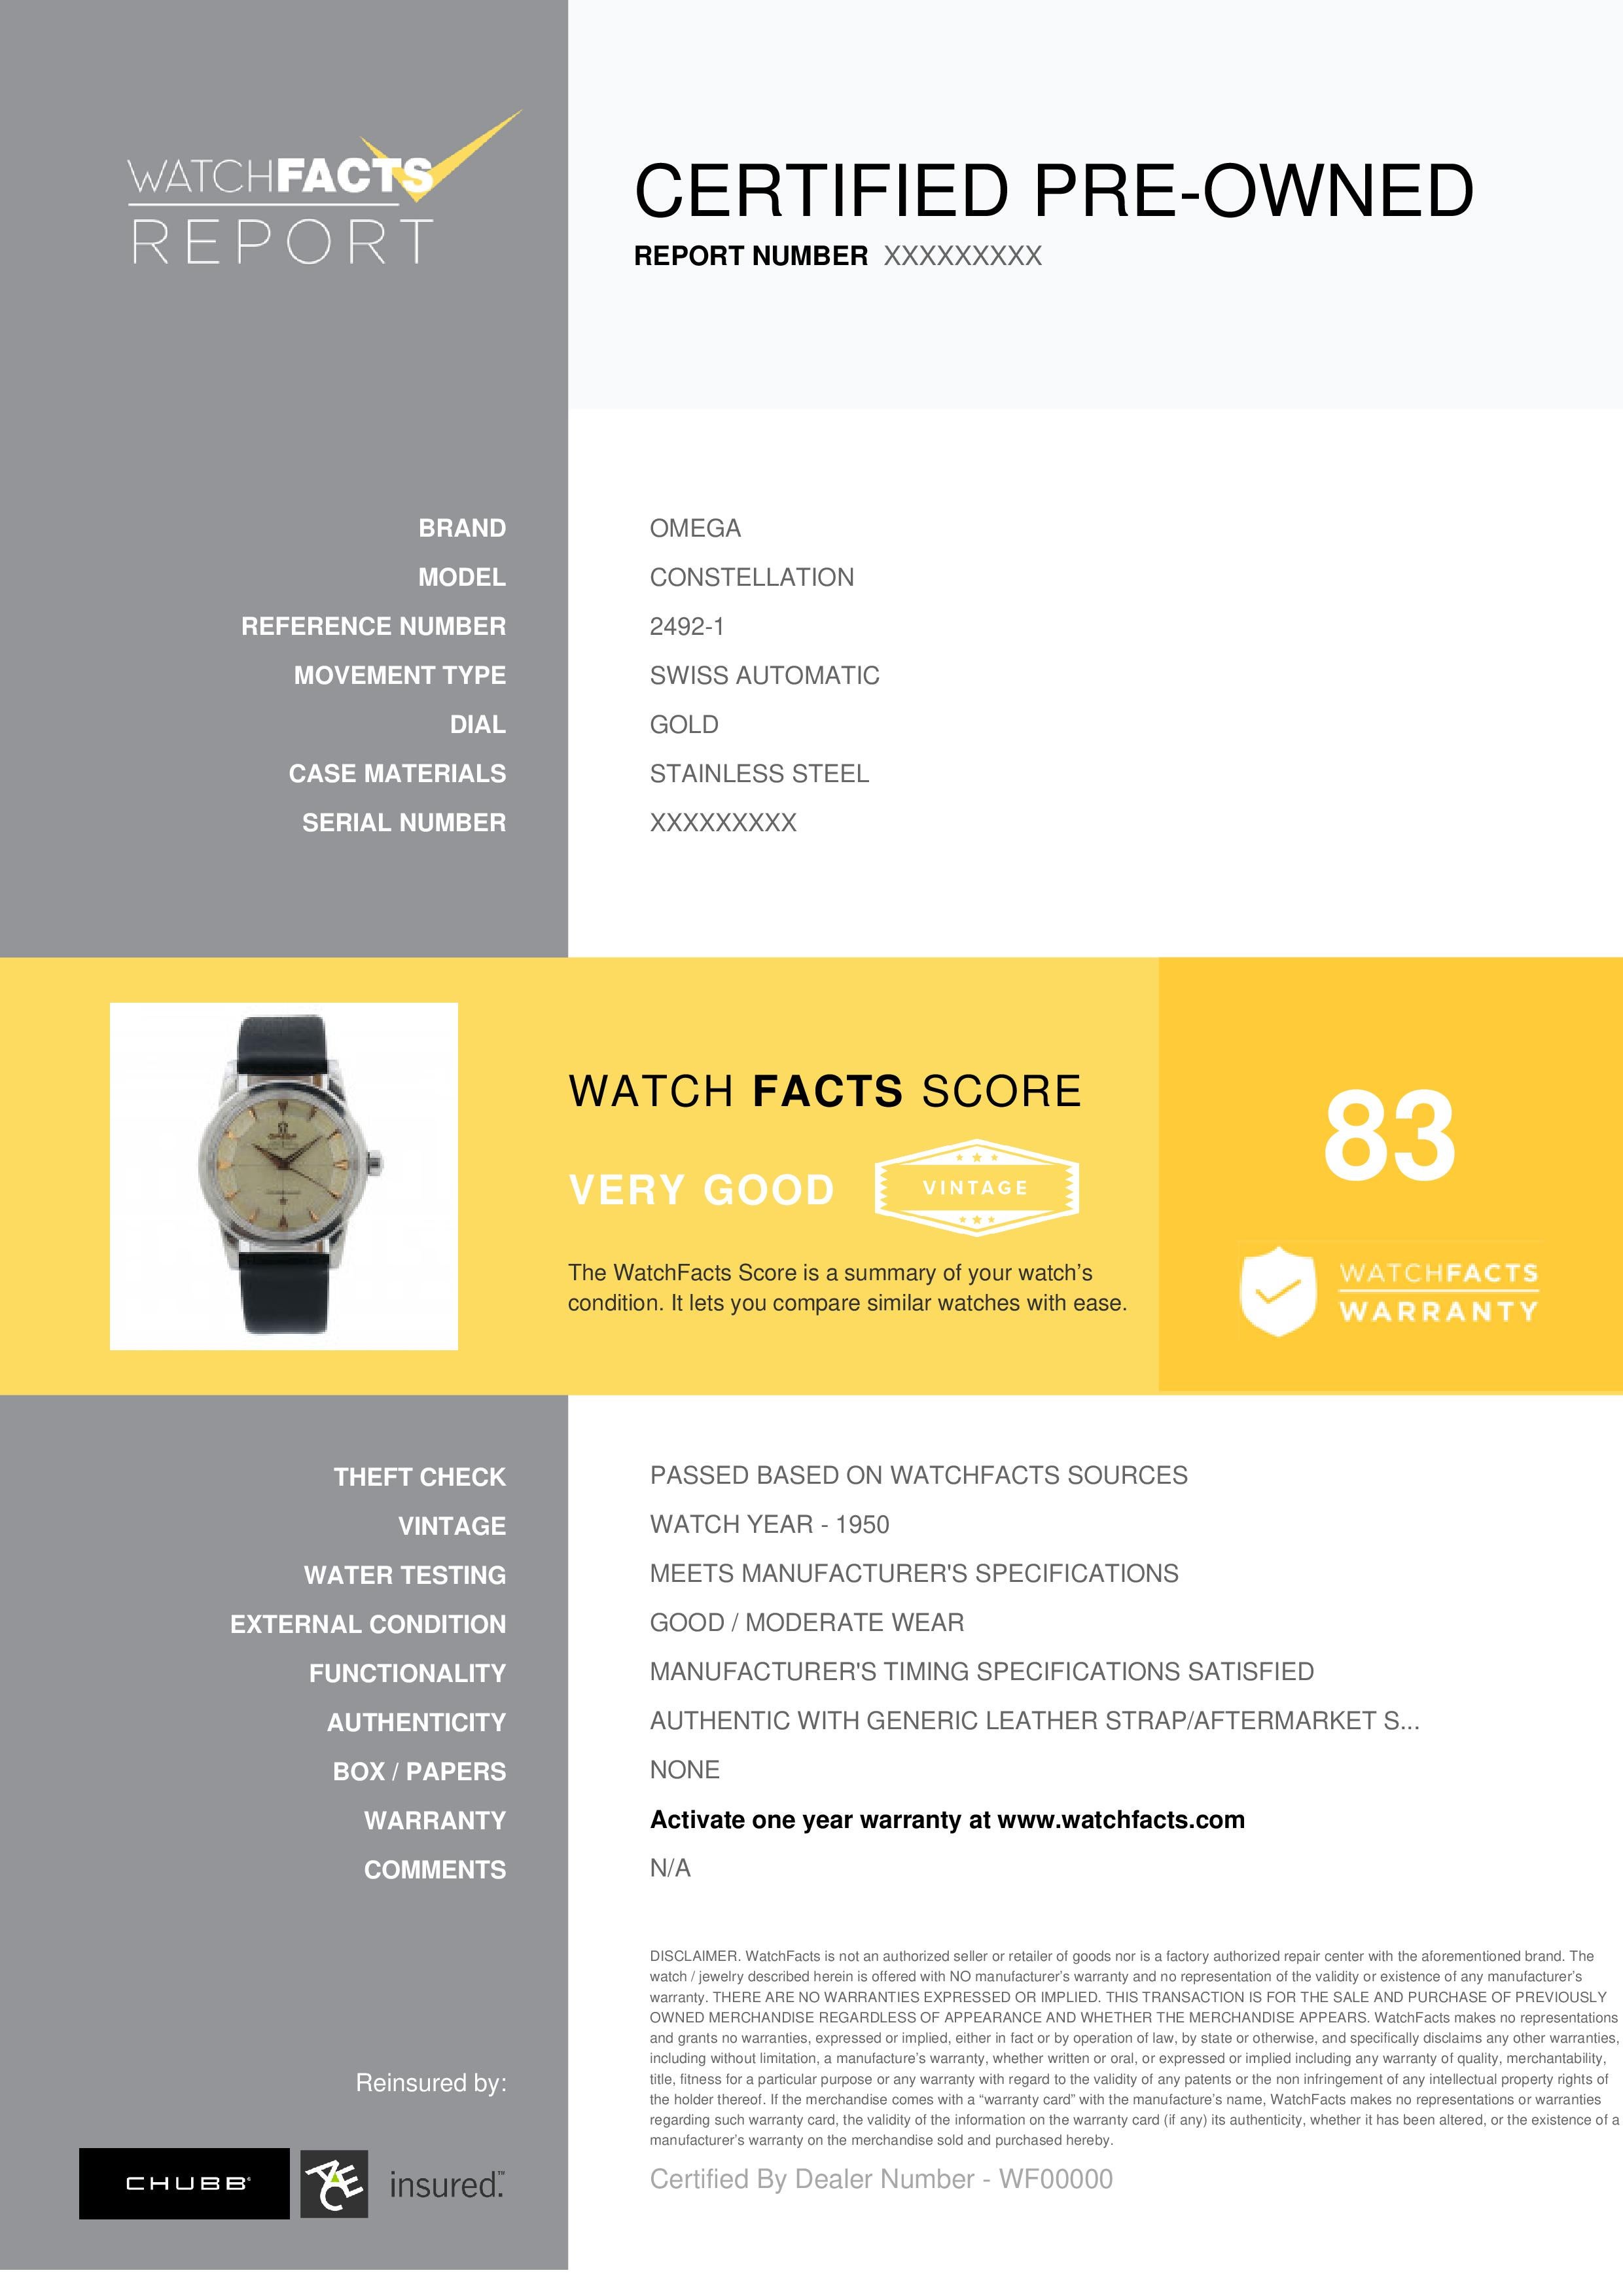 Omega Constellation Reference #: 2492-1. Mens Swiss Automatic Watch Stainless Steel Gold 34 MM. Verified and Certified by WatchFacts. 1 year warranty offered by WatchFacts.
